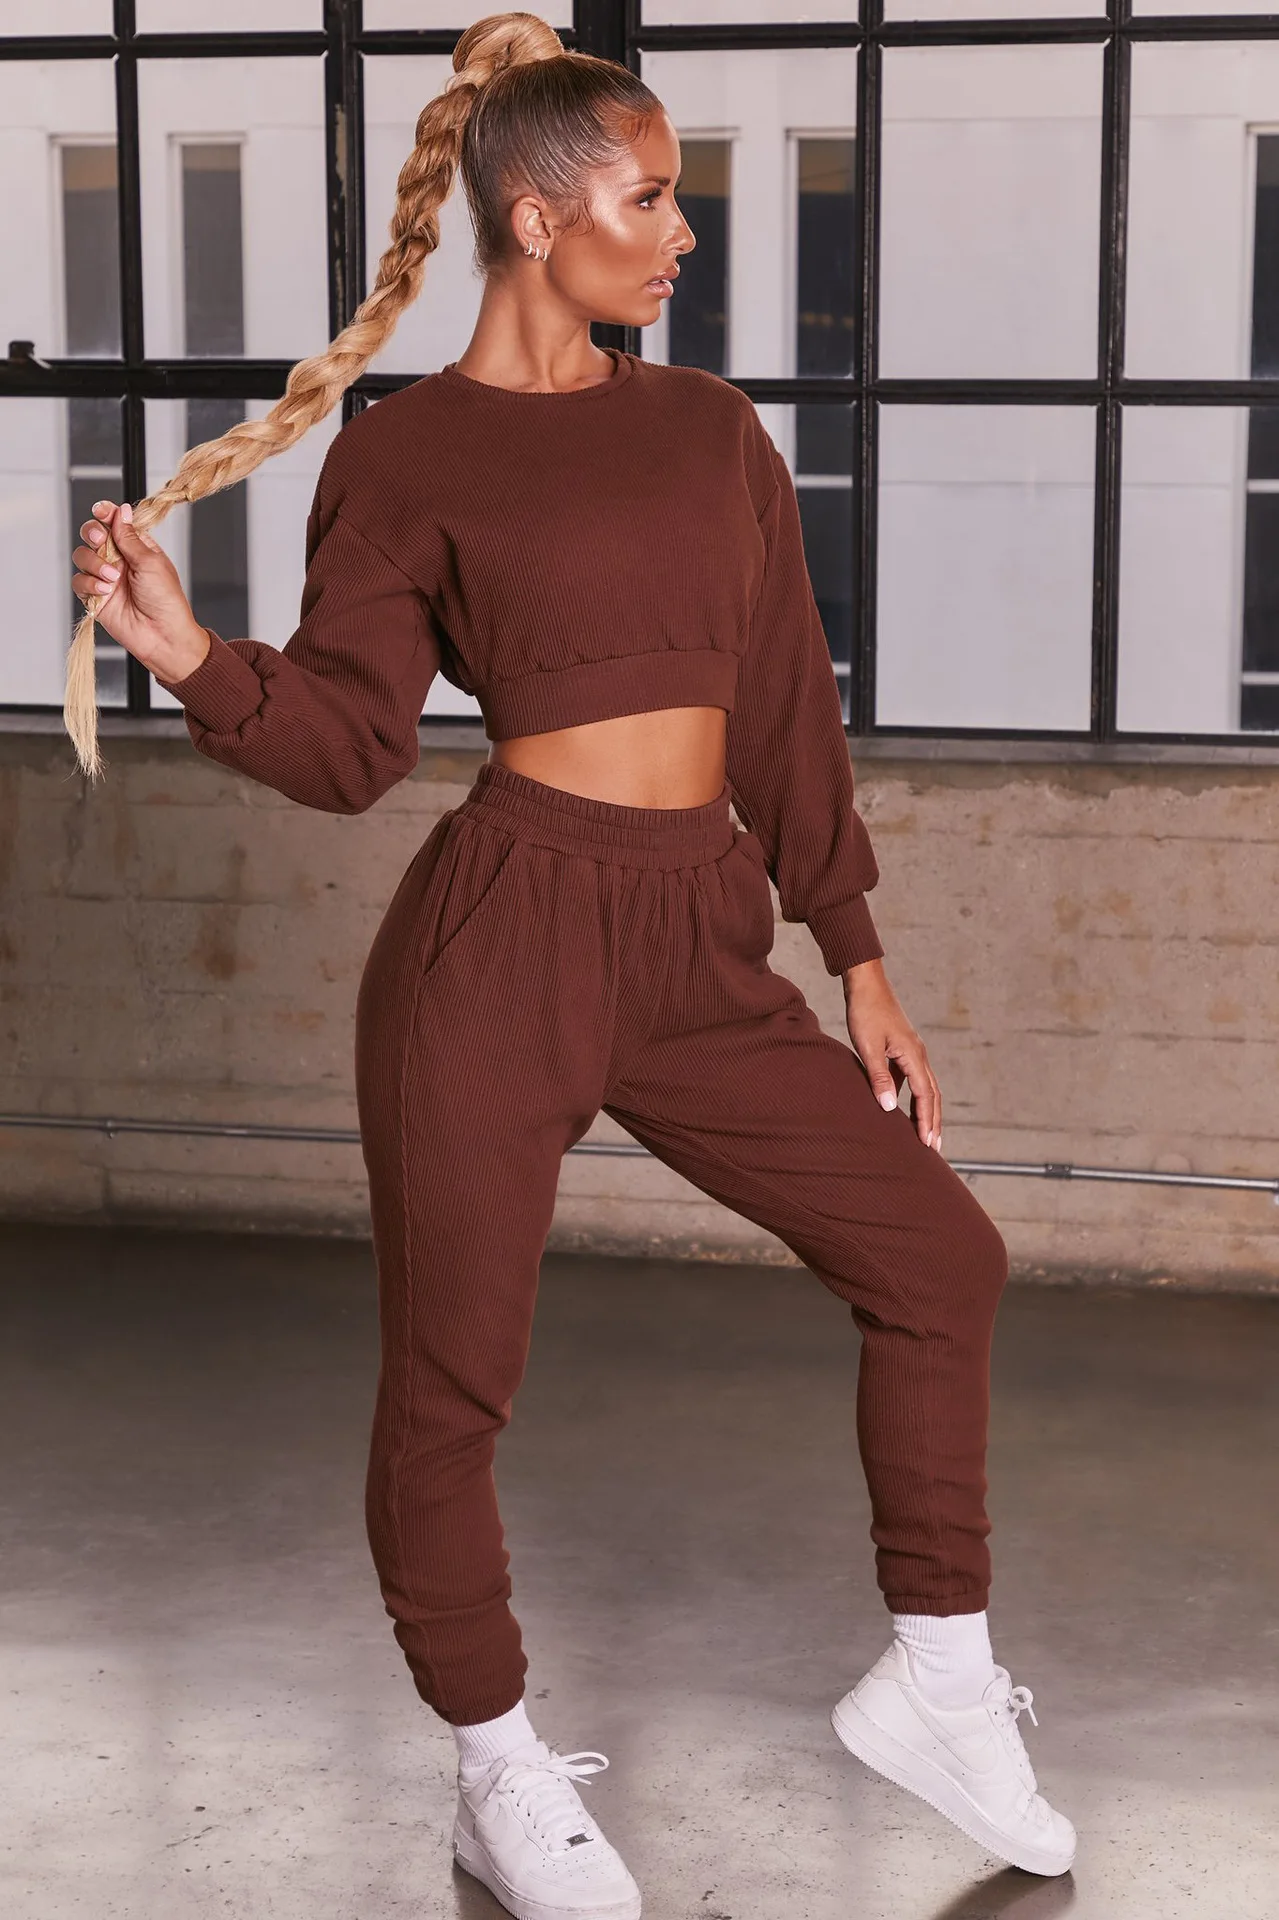 Gym Outfits Women Winter Ribbed Fitness Cropped Long Sleeve Top and Sweatpants for Gym Yoga Workout Running Super-High Quality